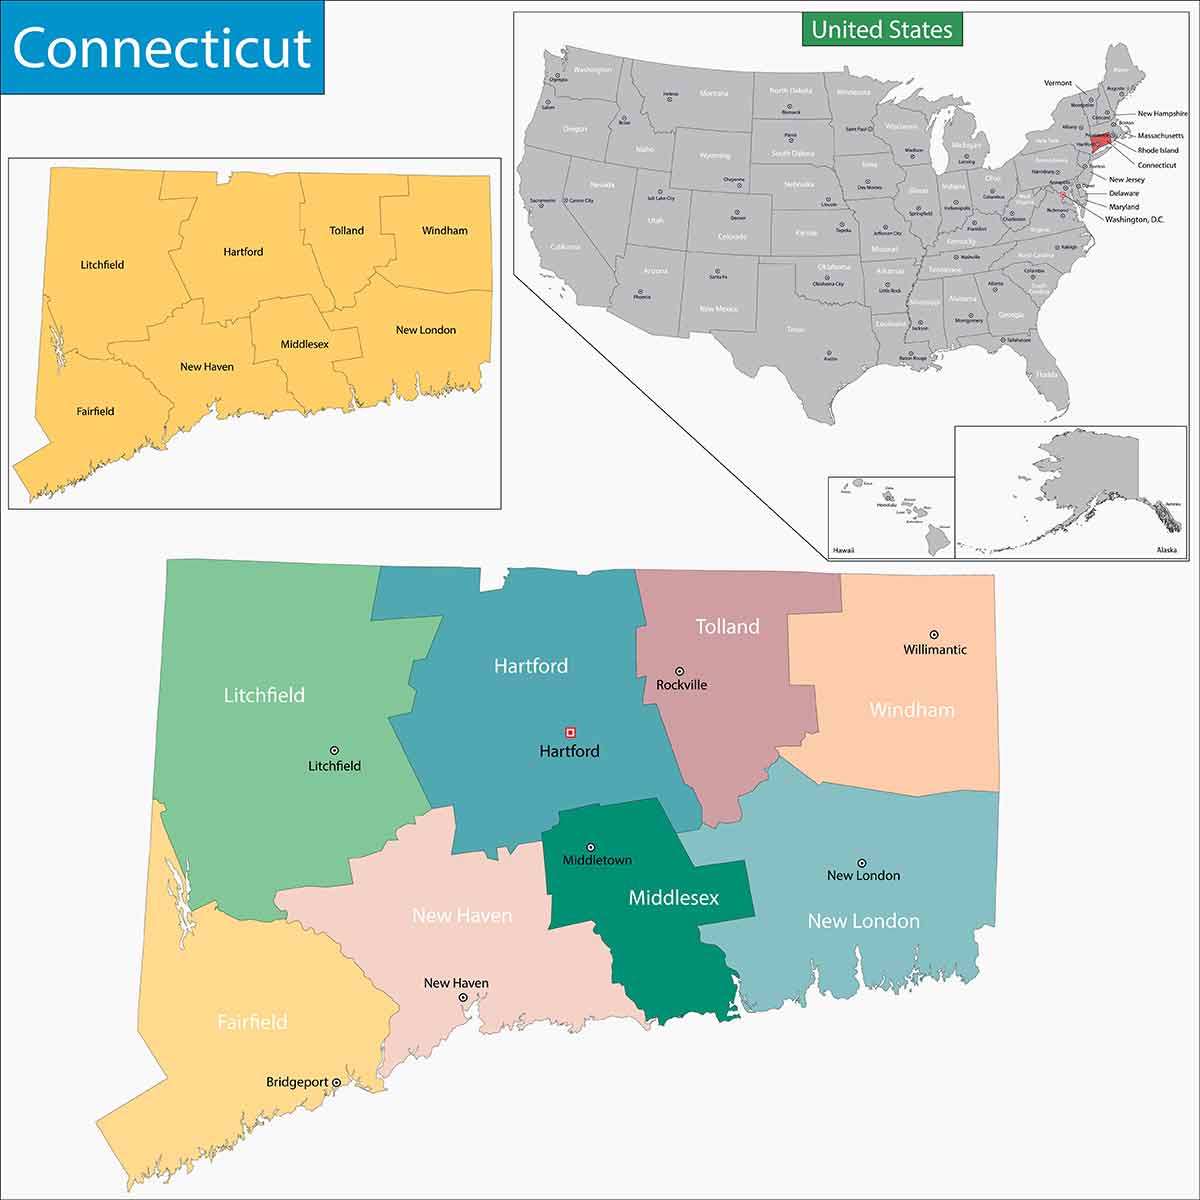 maps of connecticut and USA